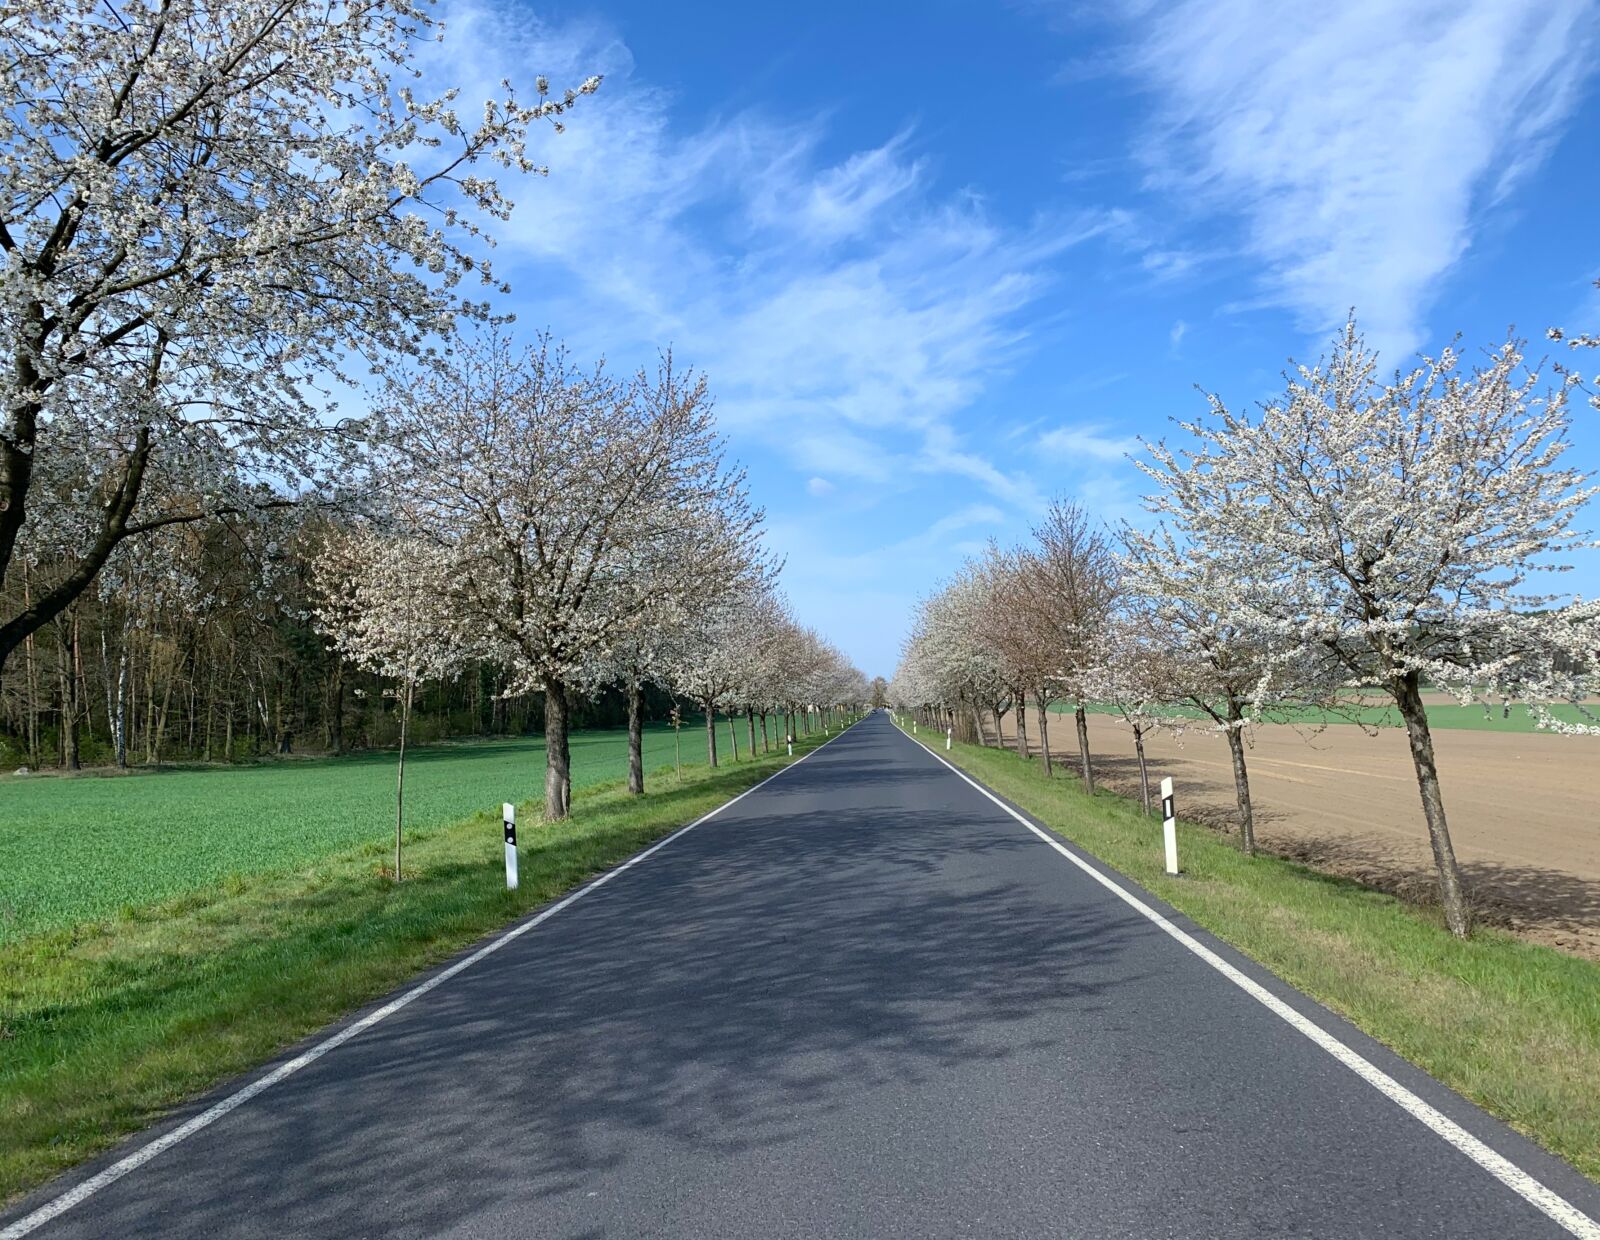 Apple iPhone XR sample photo. Blossom, fruit trees, avenue photography